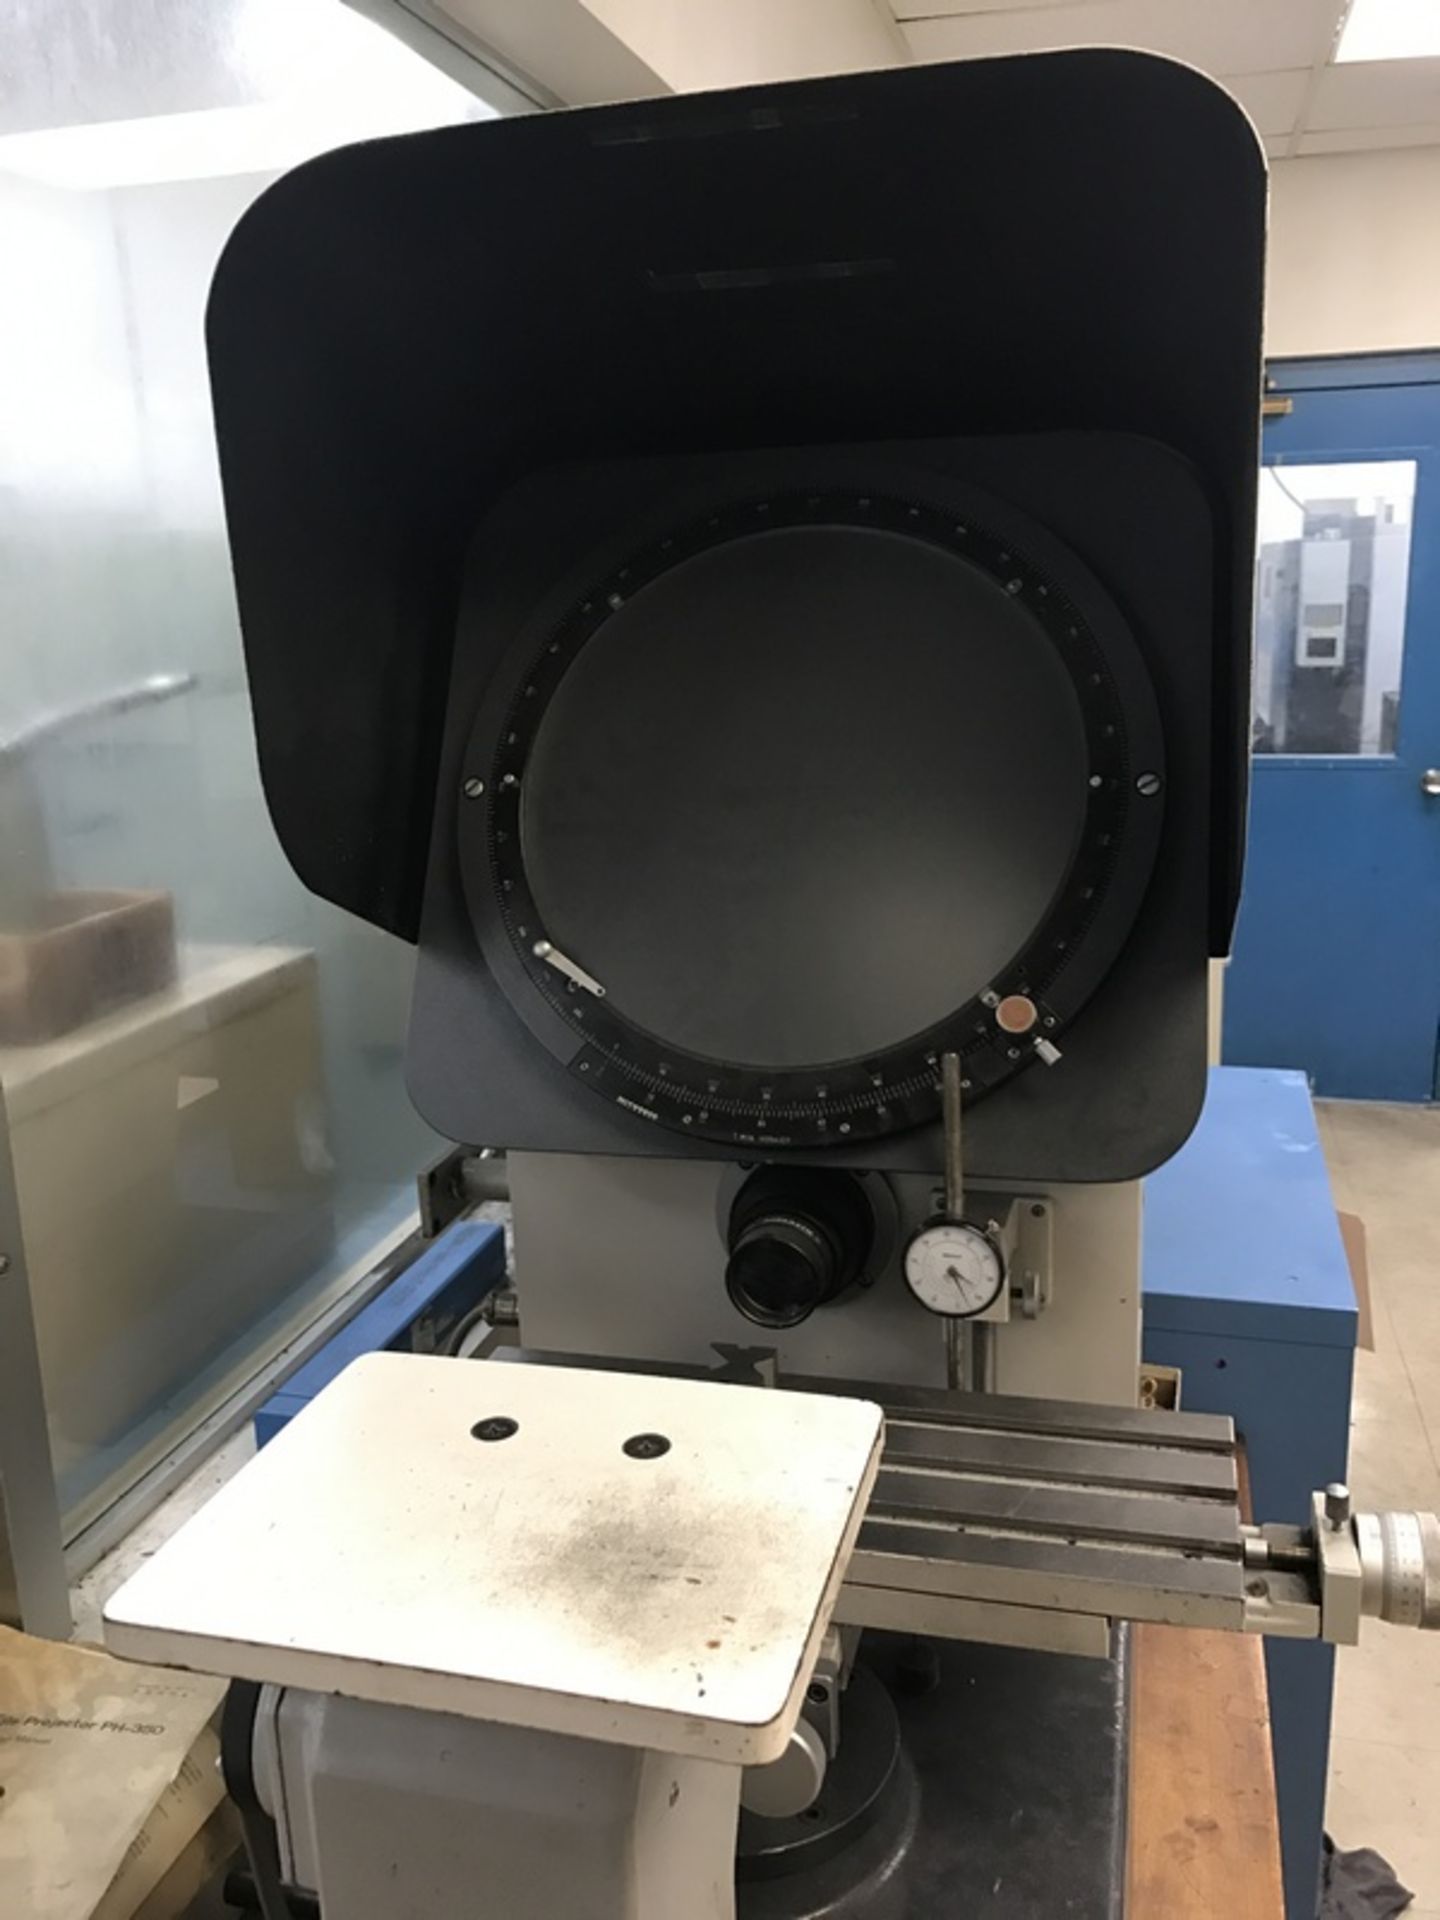 Mitutoyo - PH-350 14" Optical Comparator Profile Projector, Model PH-350, SN: 1086, Includes Maple - Image 3 of 5